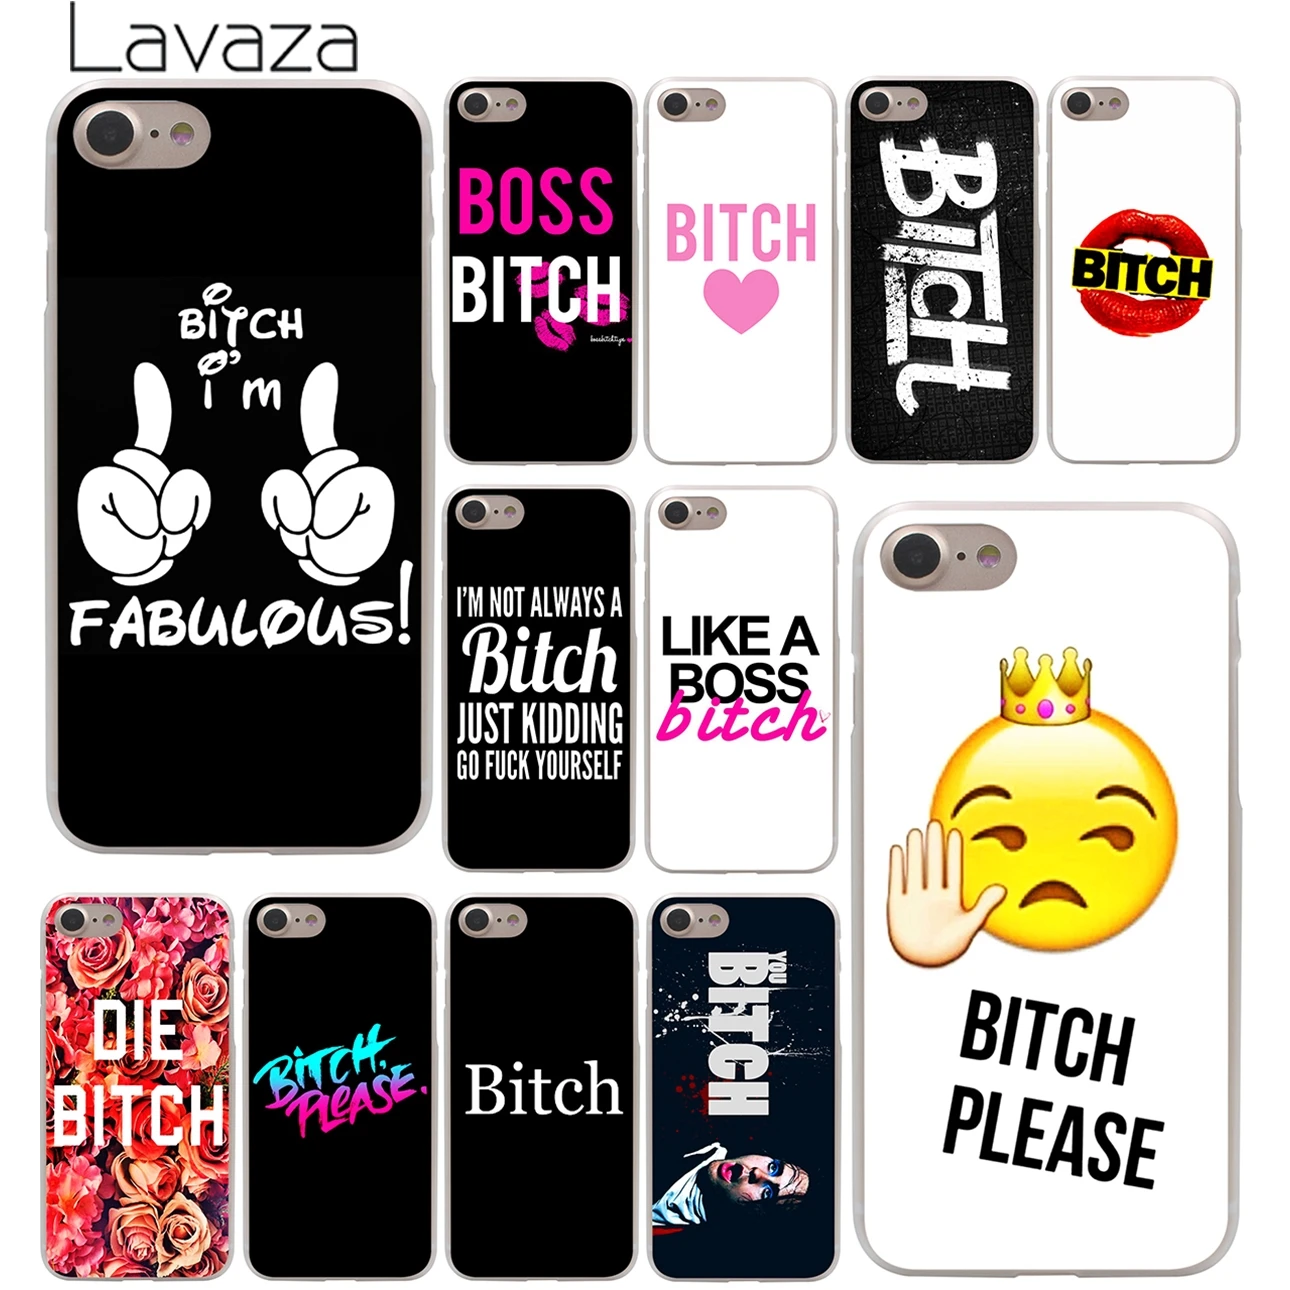 

Lavaza boss Bitch mode on pink please Emoji art Hard Phone Case for iPhone XR X XS 11 Pro Max 10 7 8 6 6S 5 5S SE 4 4S Cover